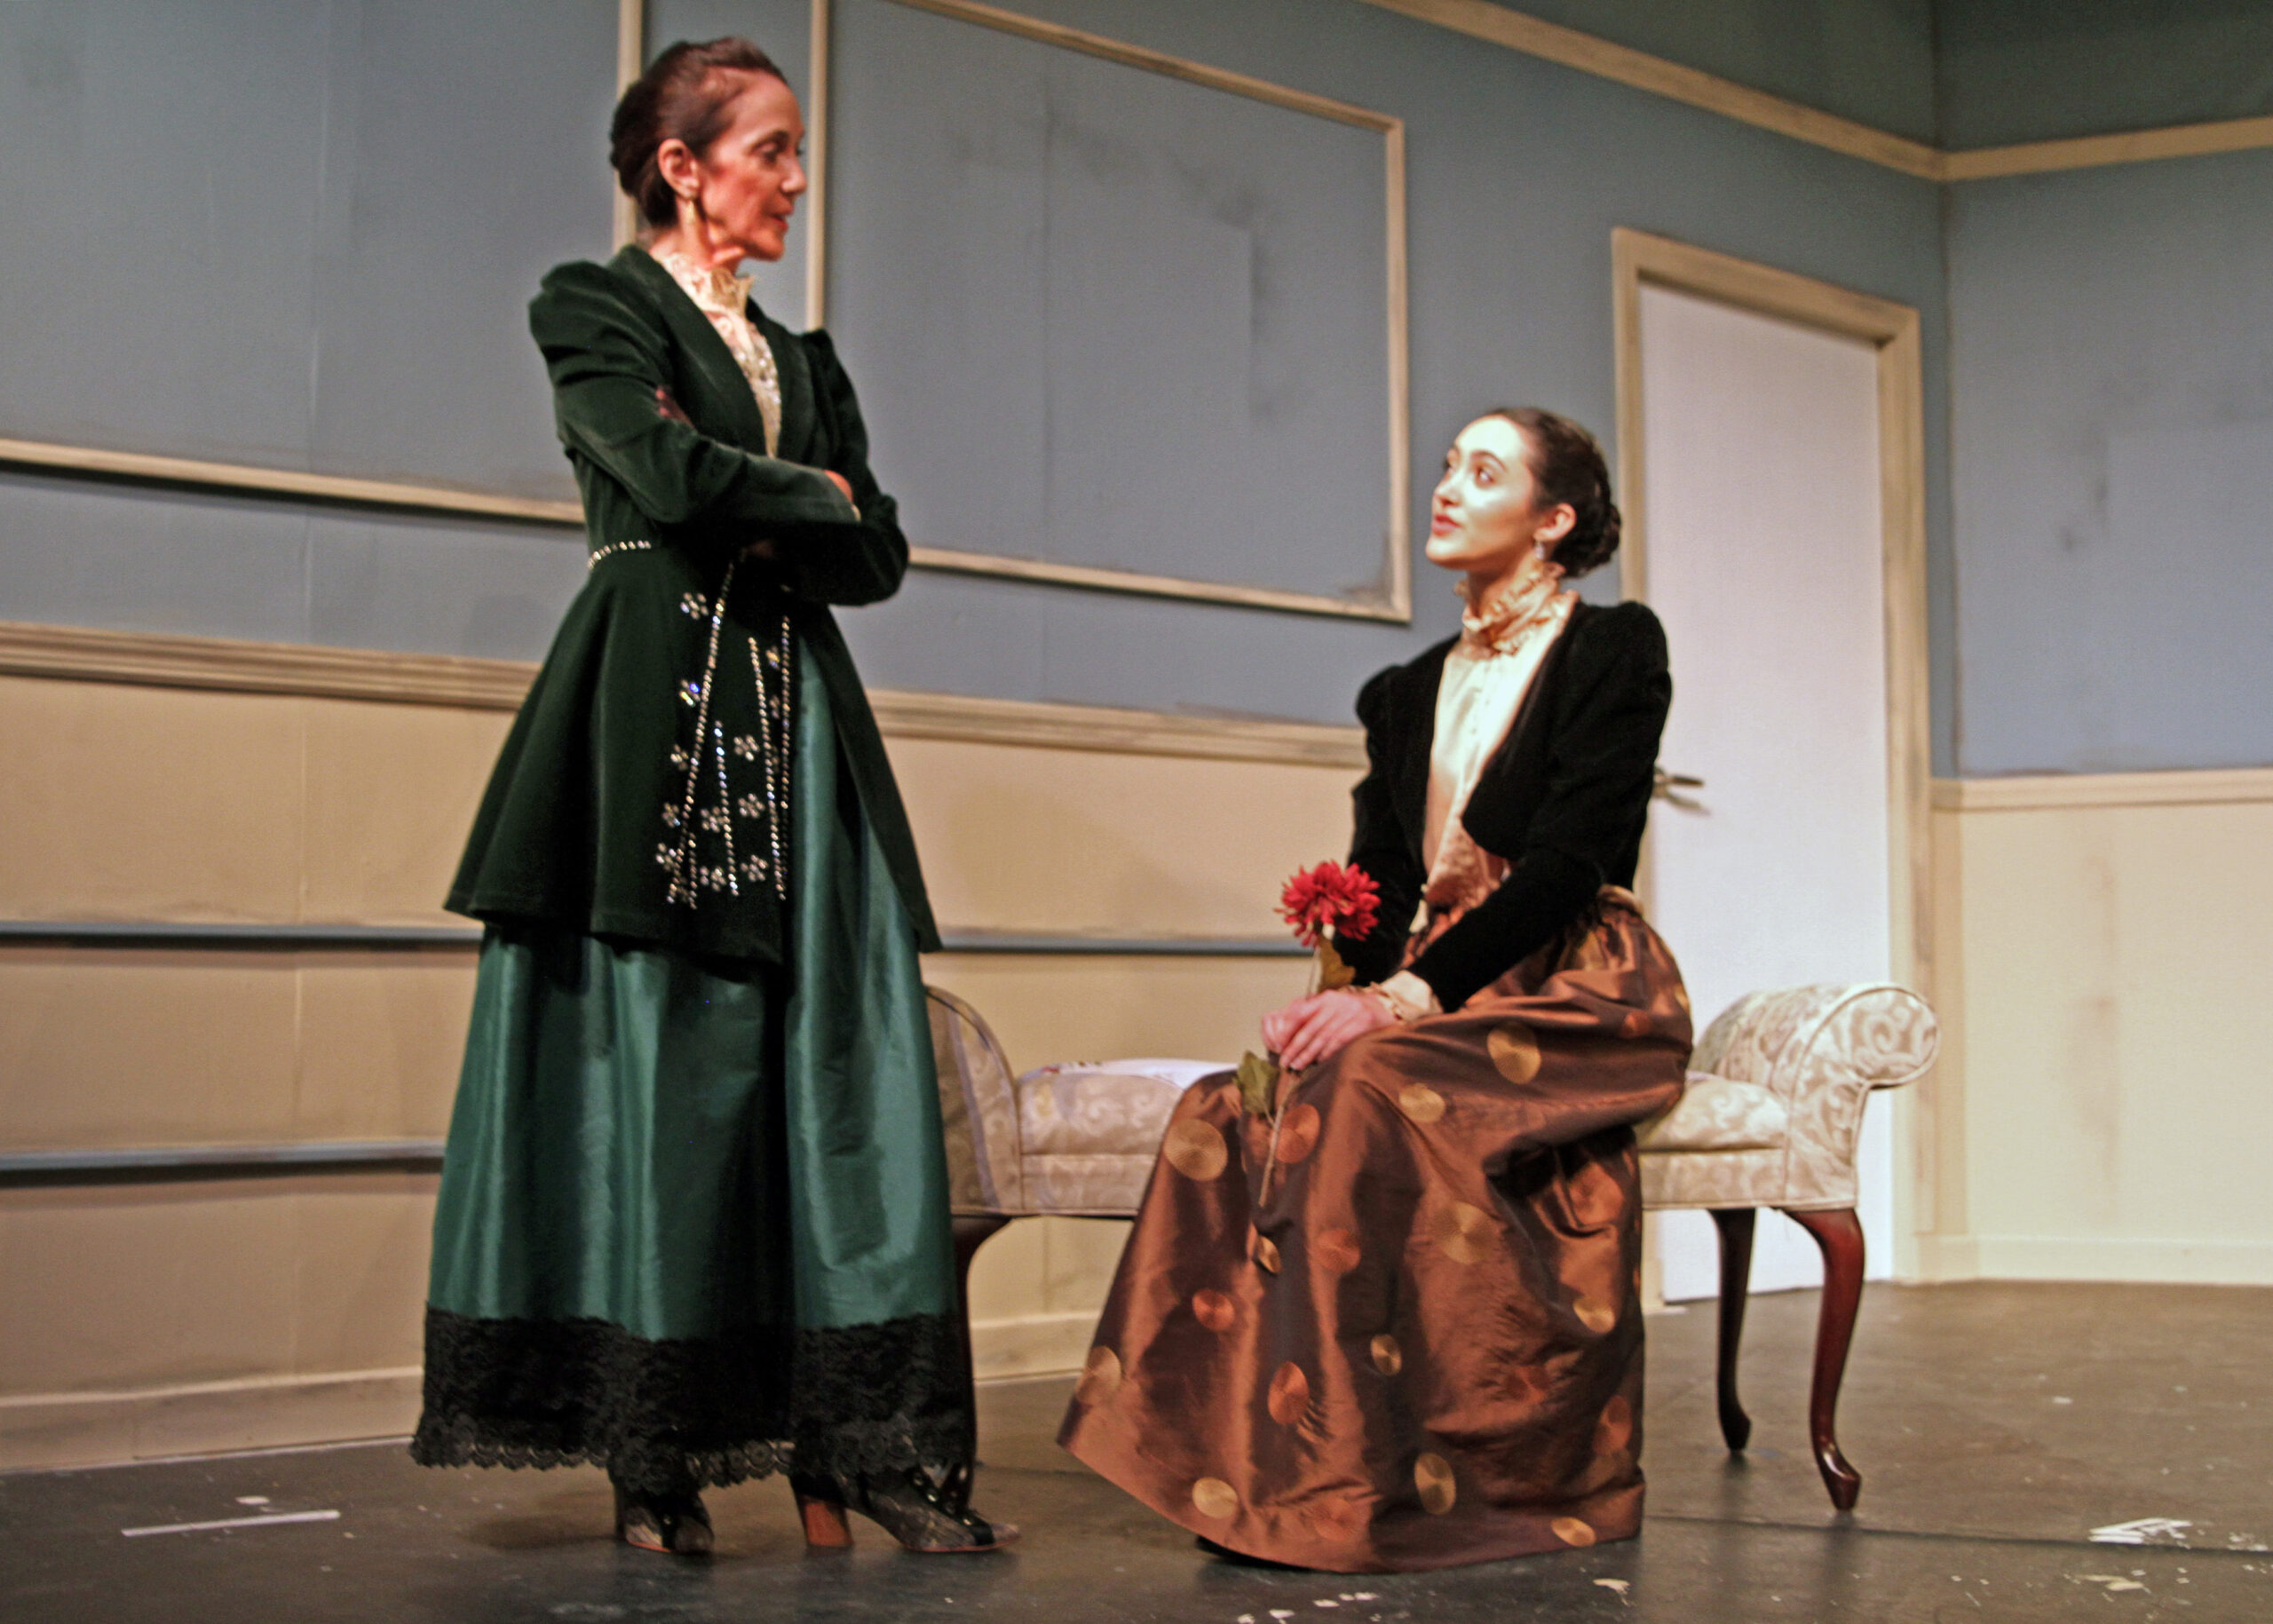 Rosemary Cline and Molly Brennan in rehearsal for “A Doll’s House, Part 2” presented by Hampton Theatre Company running May 26  to June 12. TOM KOCHIE